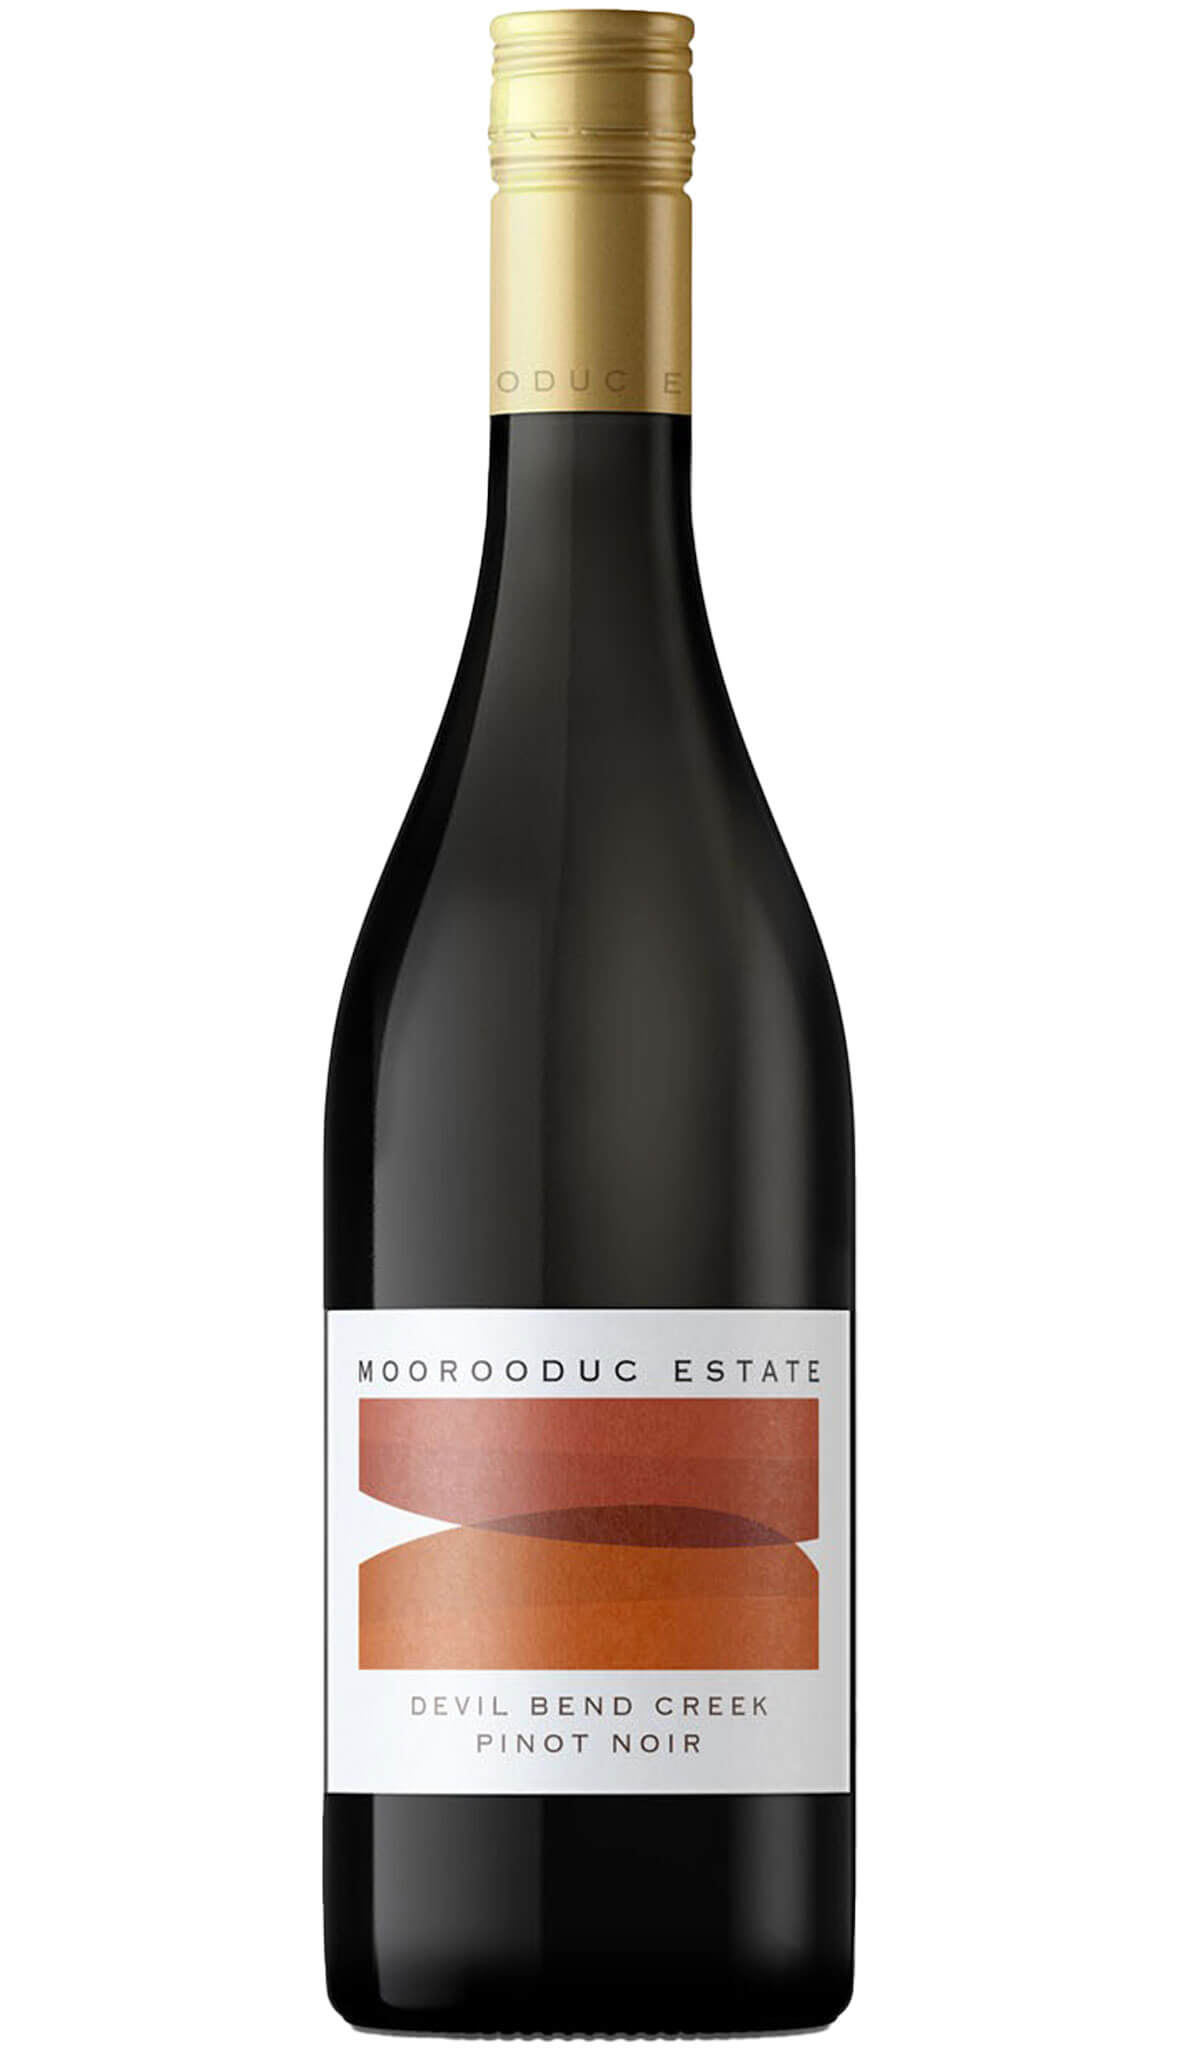 Find out more or buy Moorooduc Estate Devil Bend Creek Pinot Noir 2018 online at Wine Sellers Direct - Australia’s independent liquor specialists.